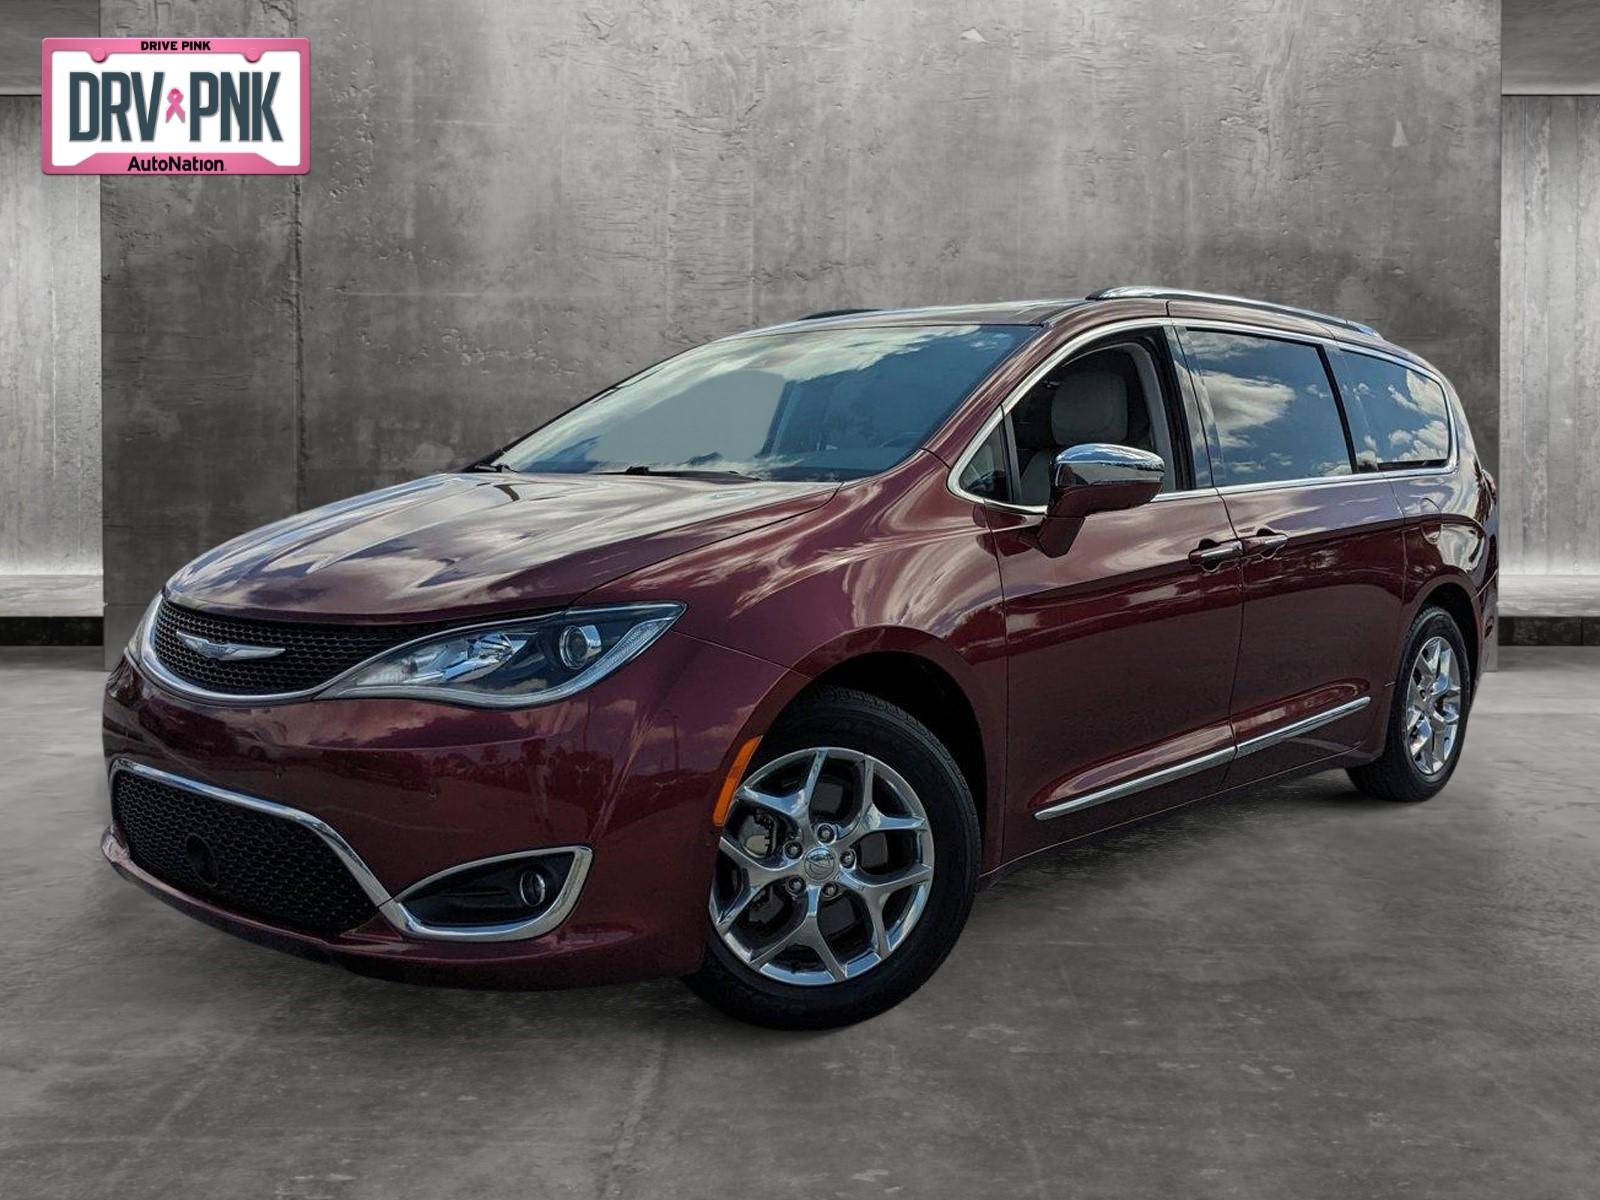 2017 Chrysler Pacifica Vehicle Photo in Winter Park, FL 32792